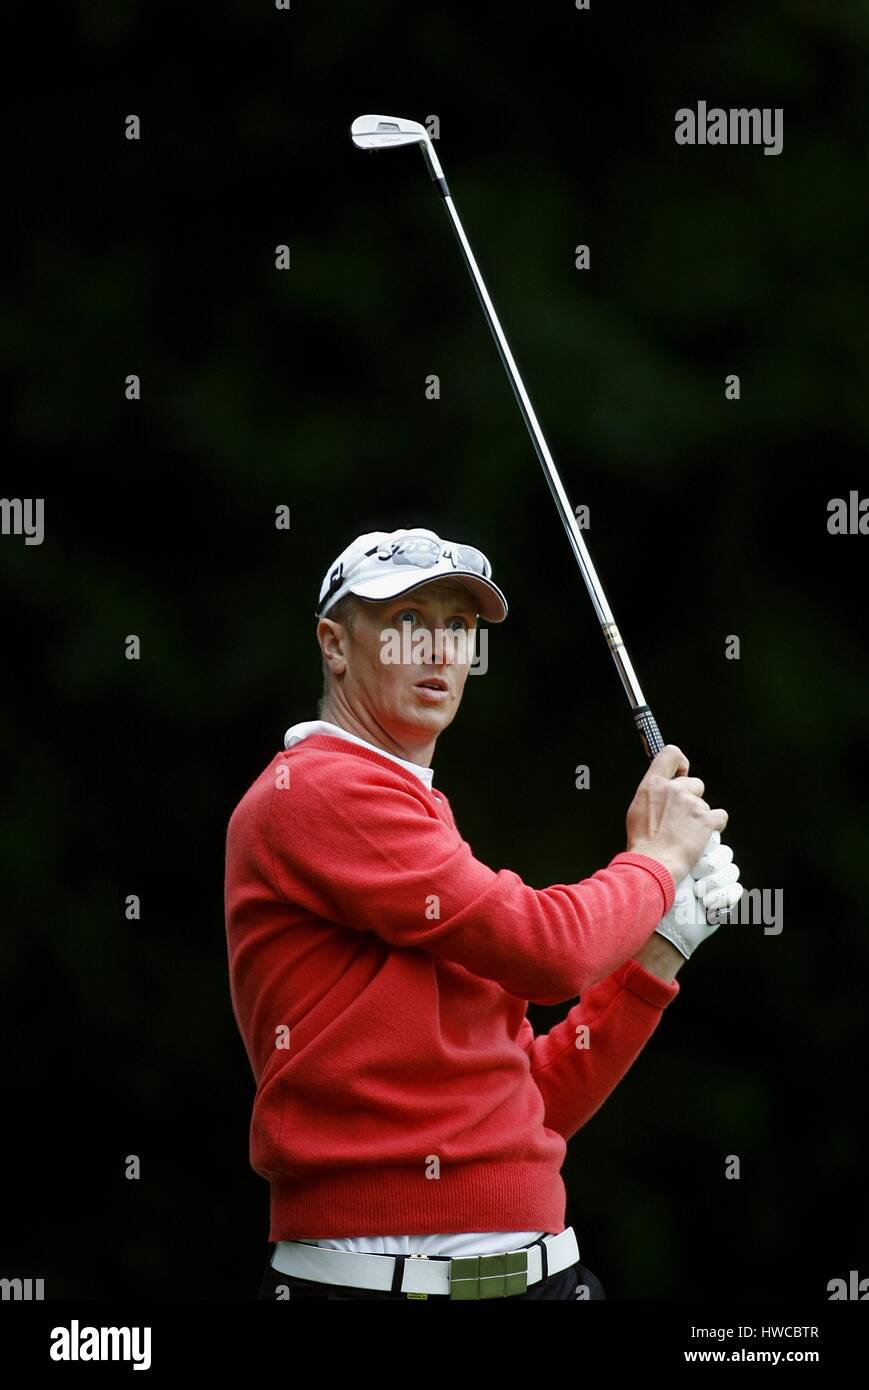 FREDRIK ANDERSSON HED SWEDEN WENTWORTH CLUB SURREY ENGLAND 26 May 2007 Stock Photo